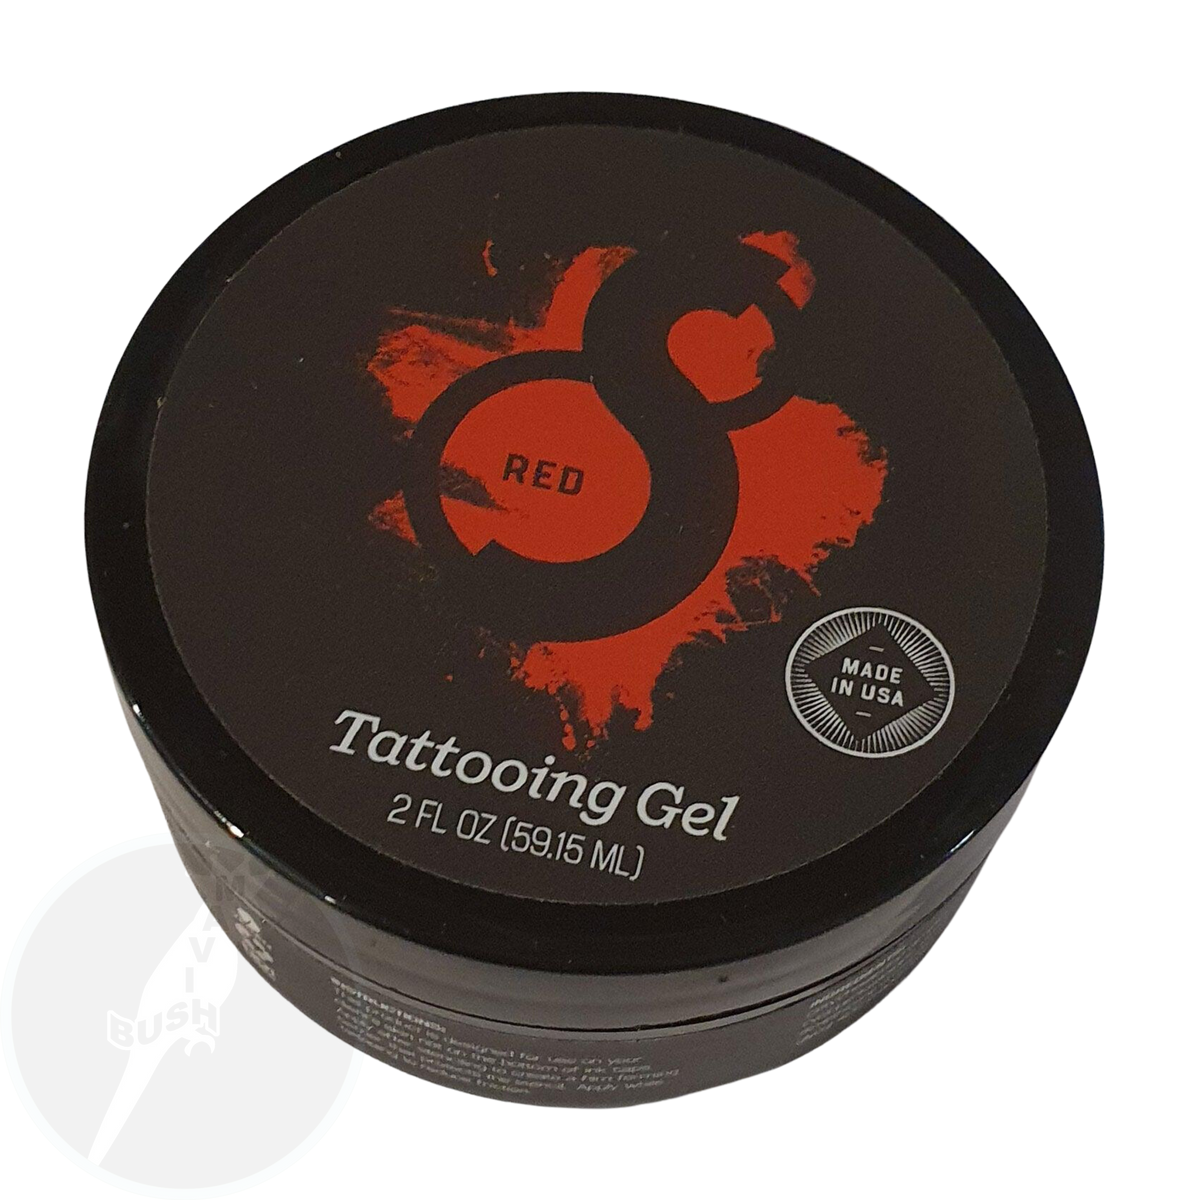 S8 Red Advanced Tattooing Barrier Gel and Aftercare 2oz/59.95ml - Mavis Bush Tattoo Supplies